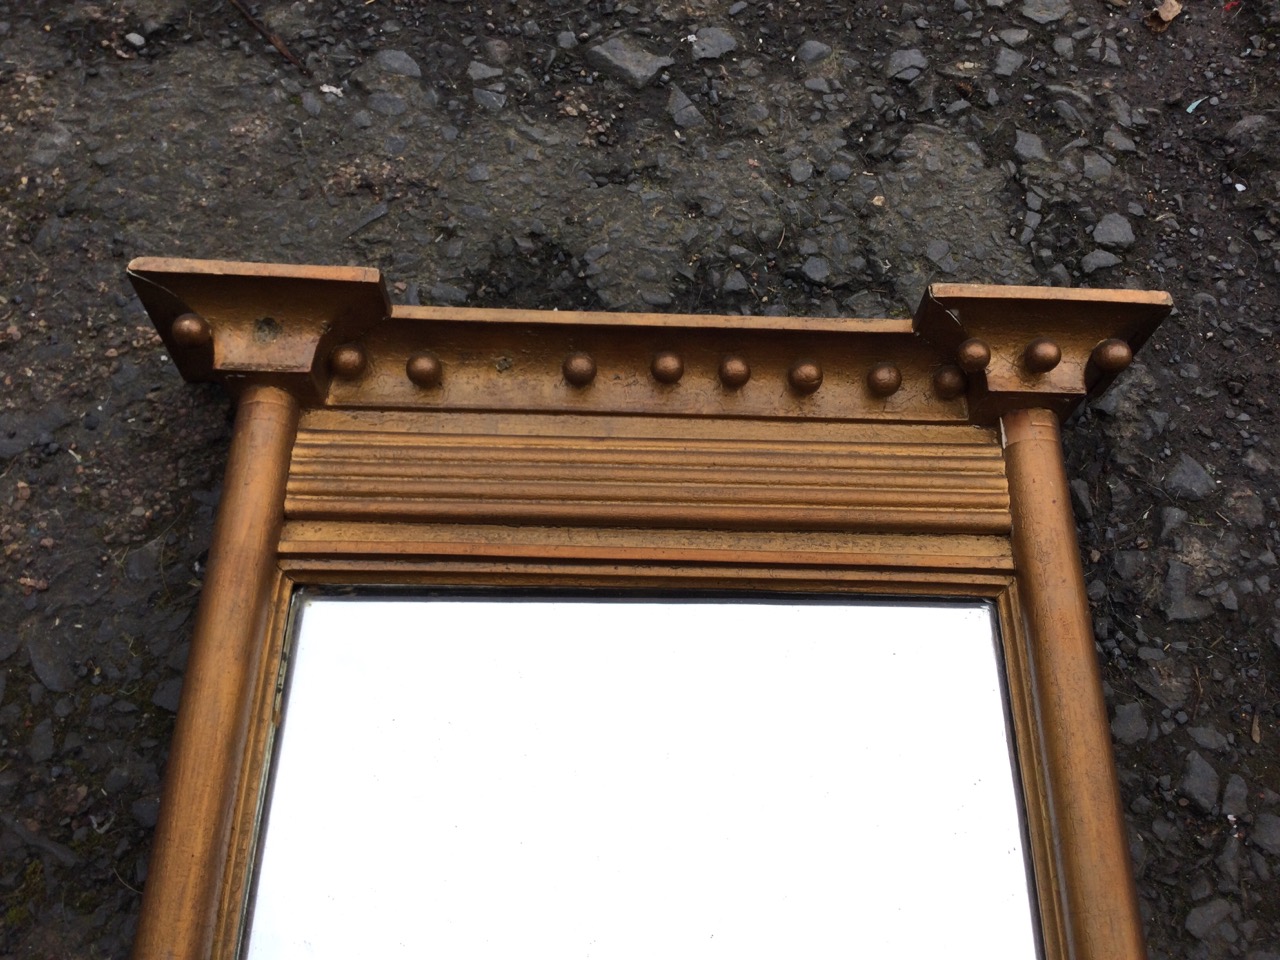 A Victorian regency style gilt pier glass, the rectangular plate framed by turned columns beneath - Image 2 of 3